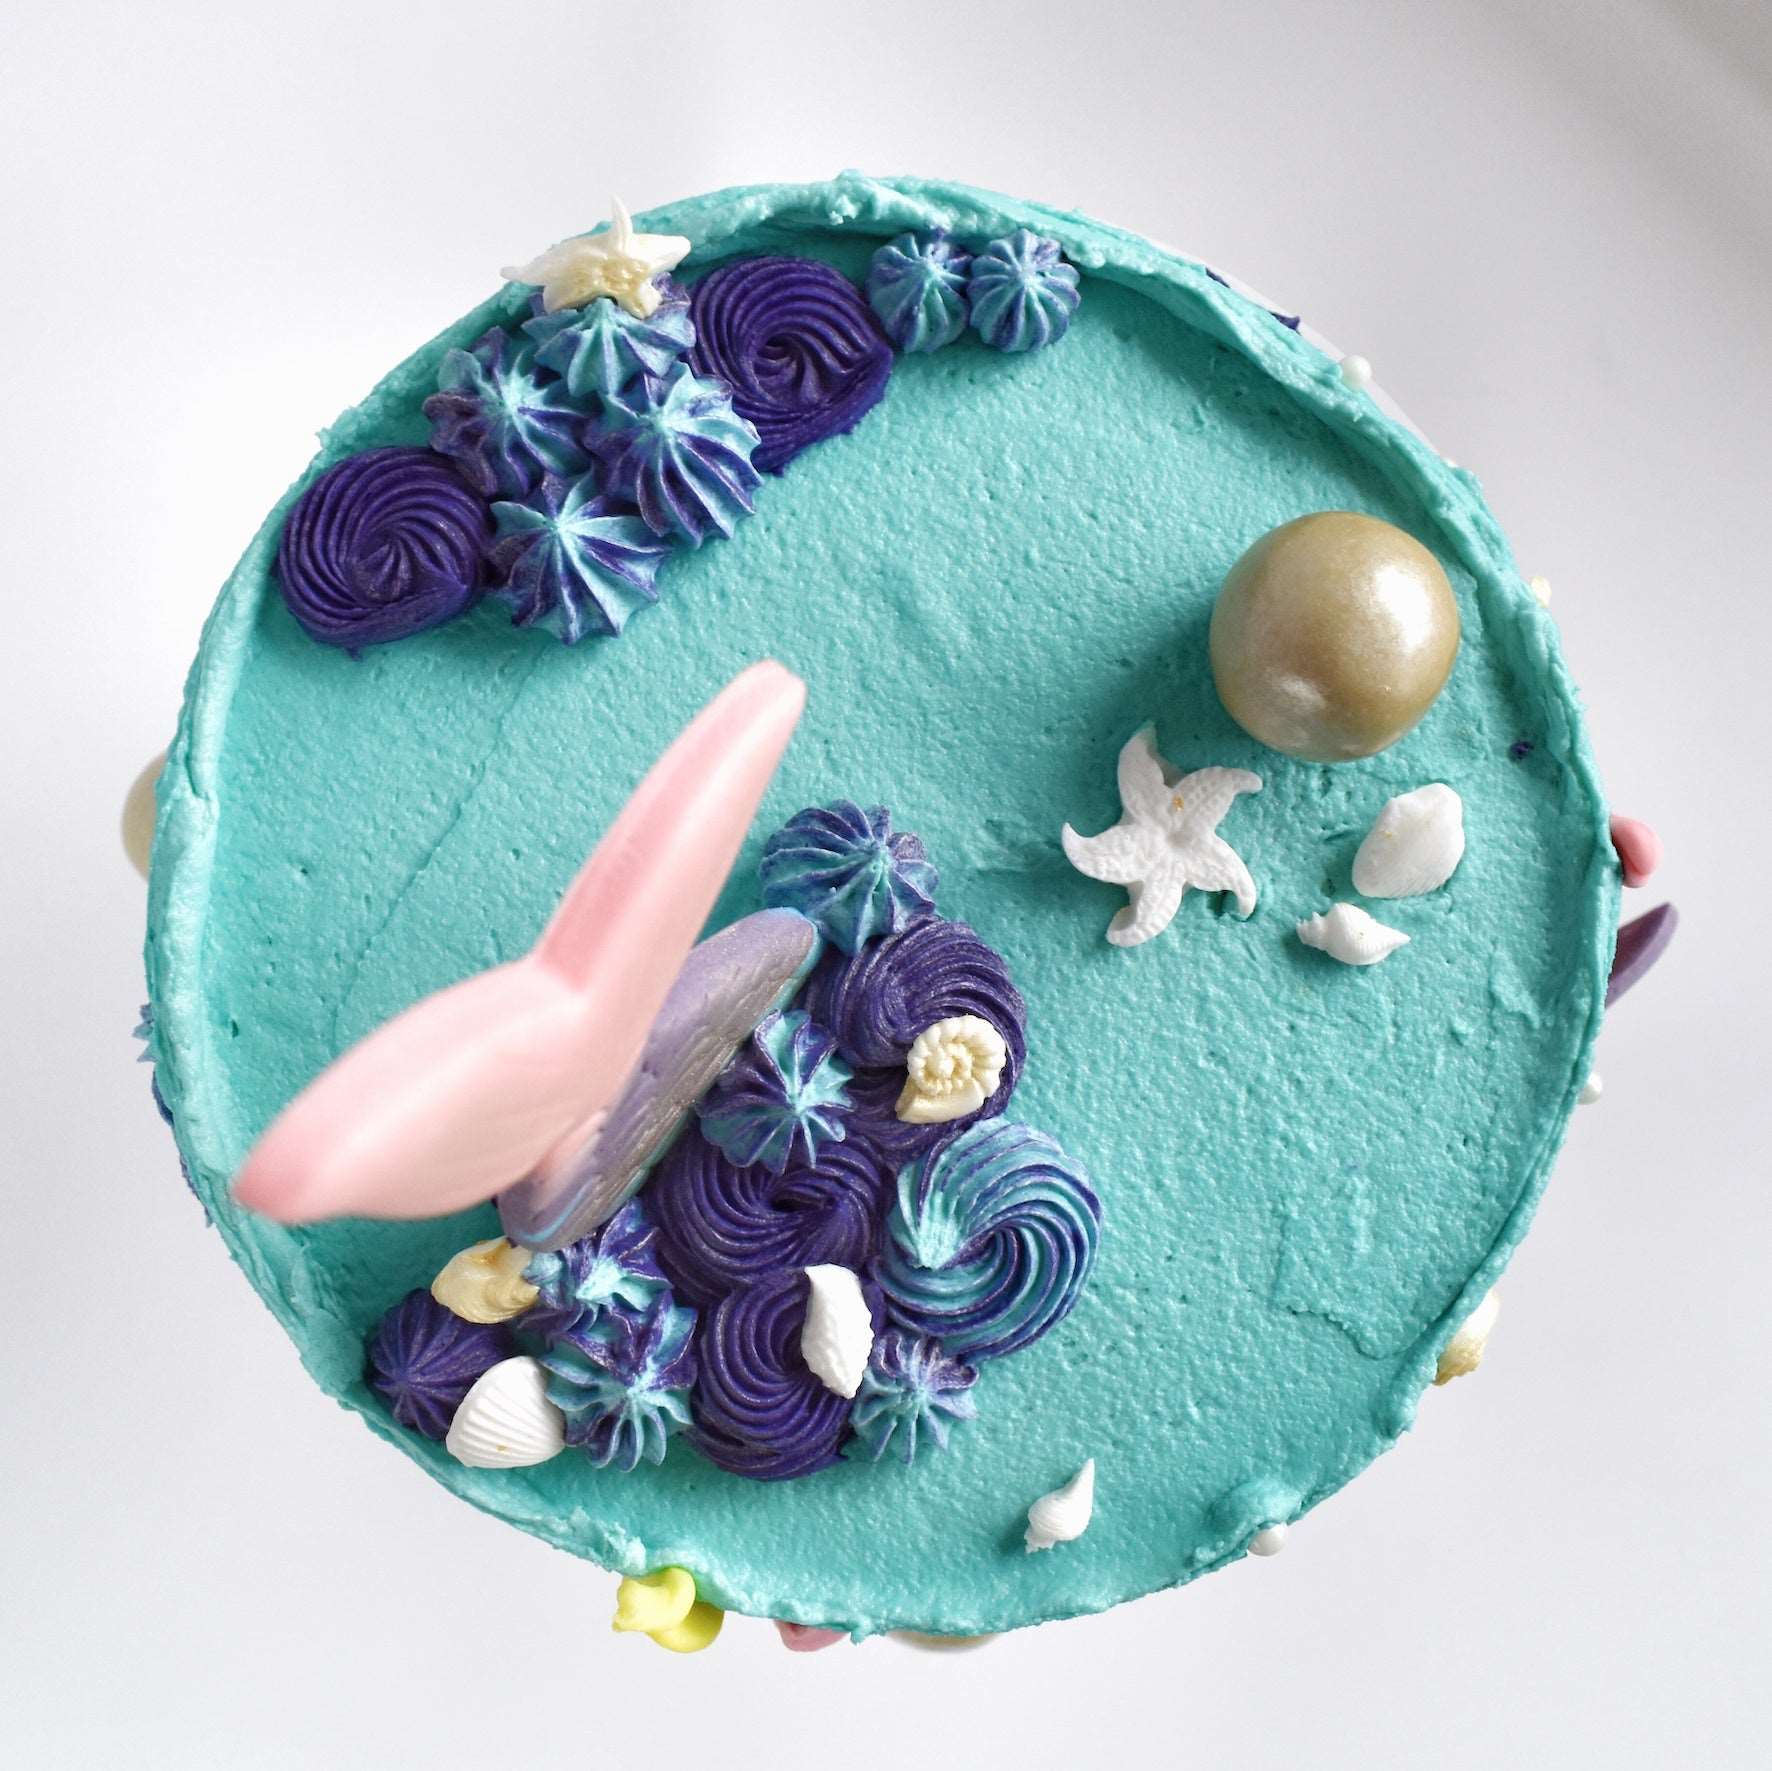 Cruise ship in the Sea Cake – Crave by Leena